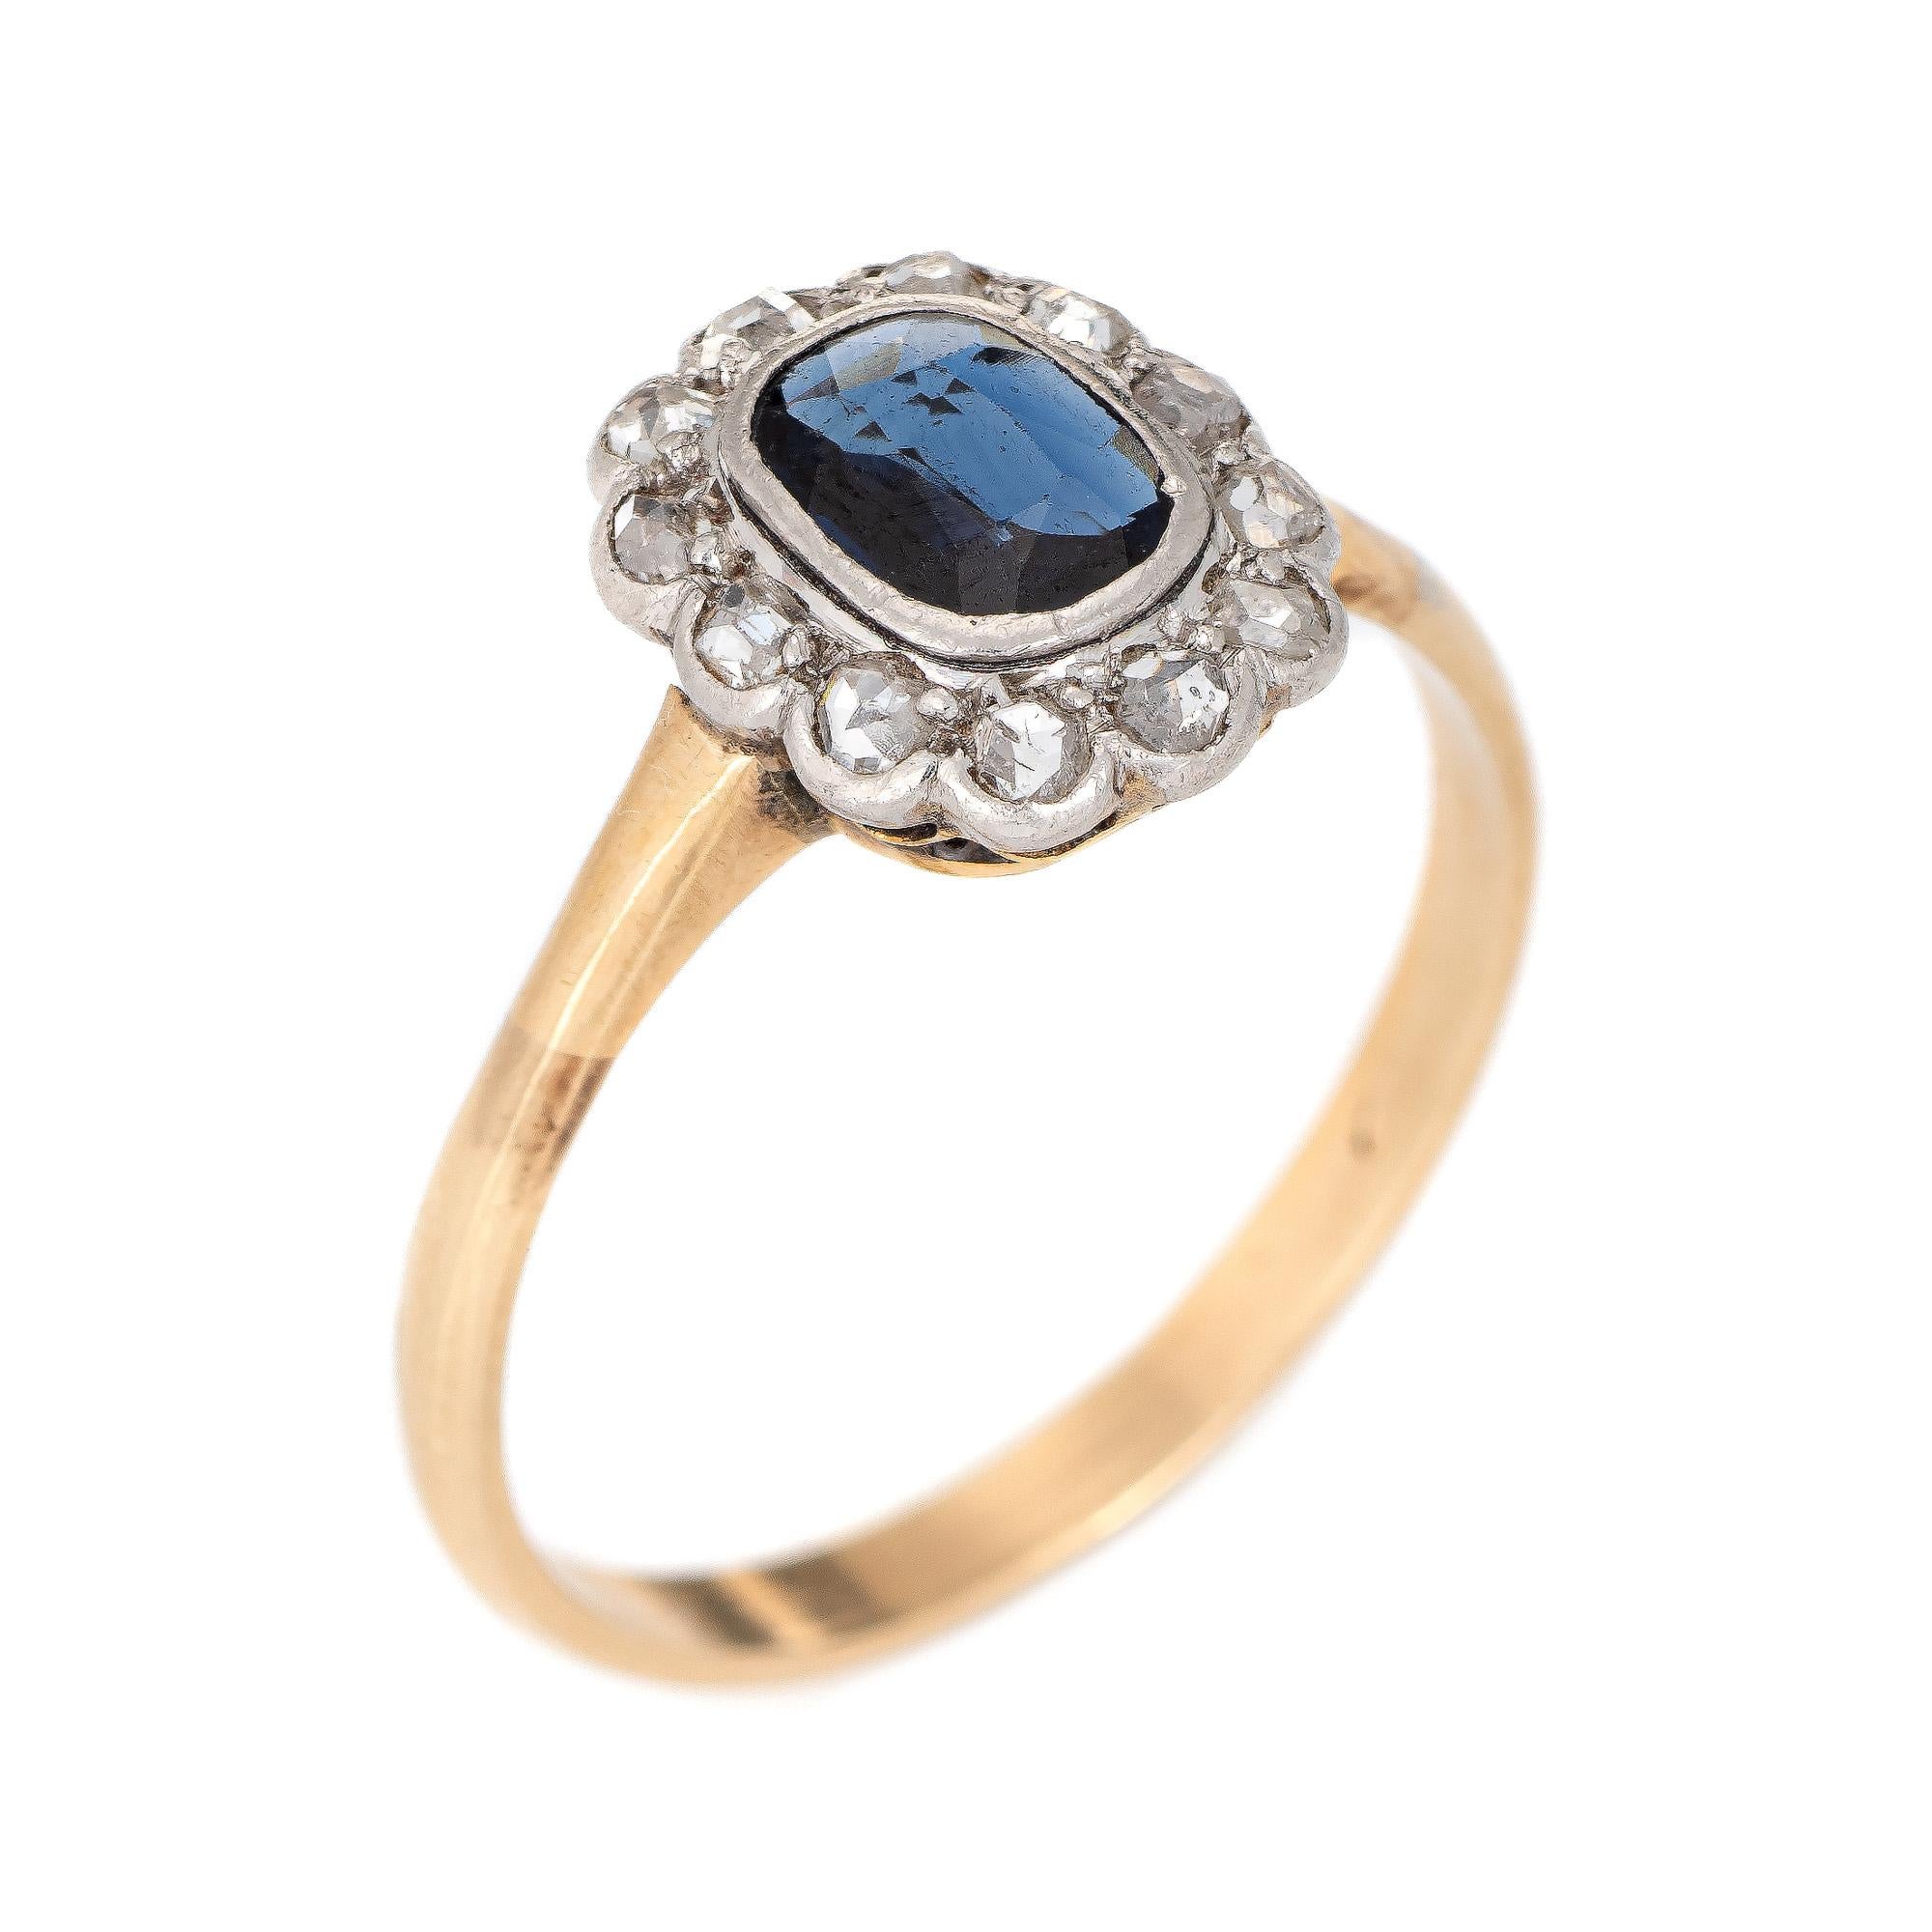 Finely detailed handmade antique Victorian gemstone engagement ring (circa 1890s) crafted in 14 karat yellow gold and platinum. 

One cushion shaped mixed cut natural sapphire, approx. 0.60ct (6.80 x 5.30 x 1.77mm), dark blue color, lightly